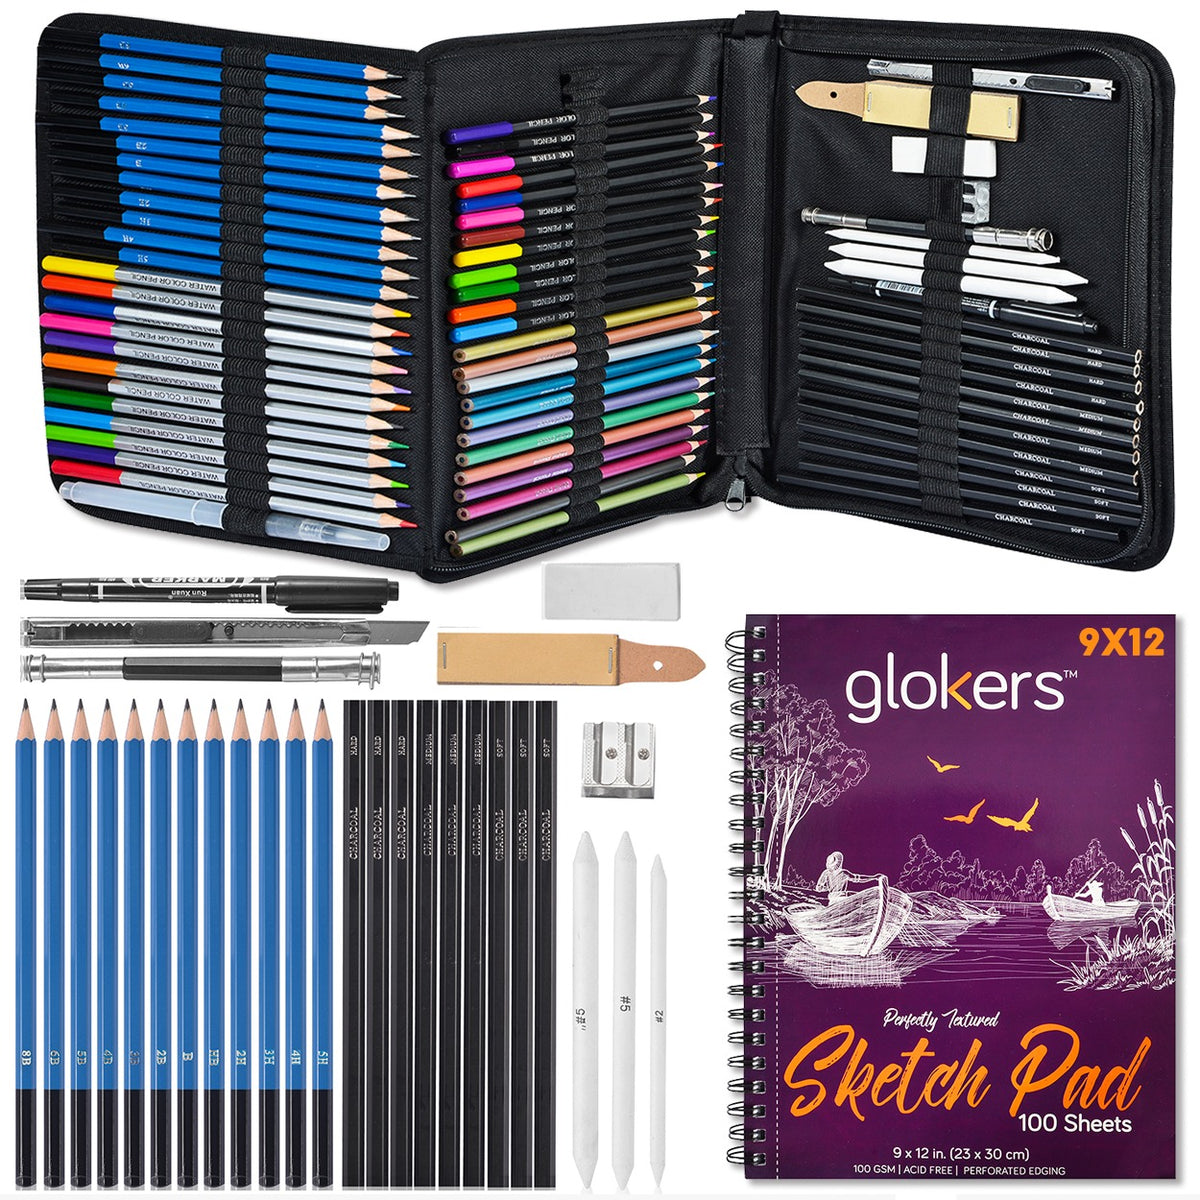 Fairfax & Co 72 Piece Pencil Drawing Set for Kids